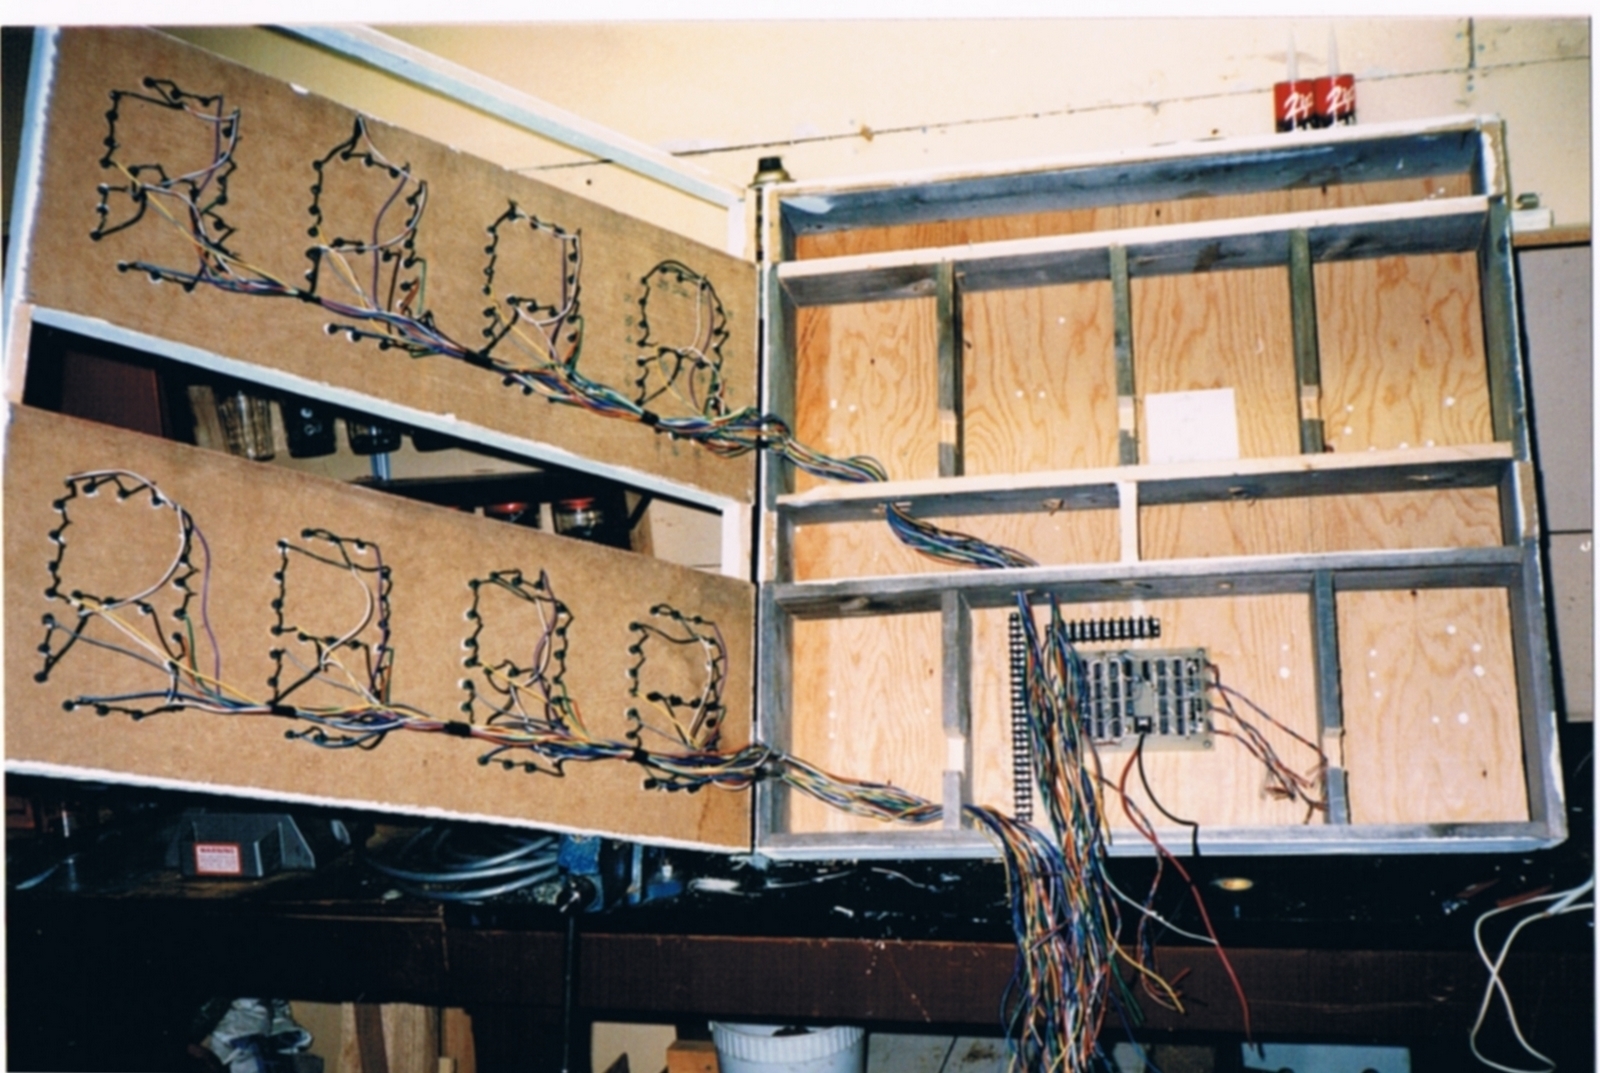 Inside the scoreboard showing wiring and electronics